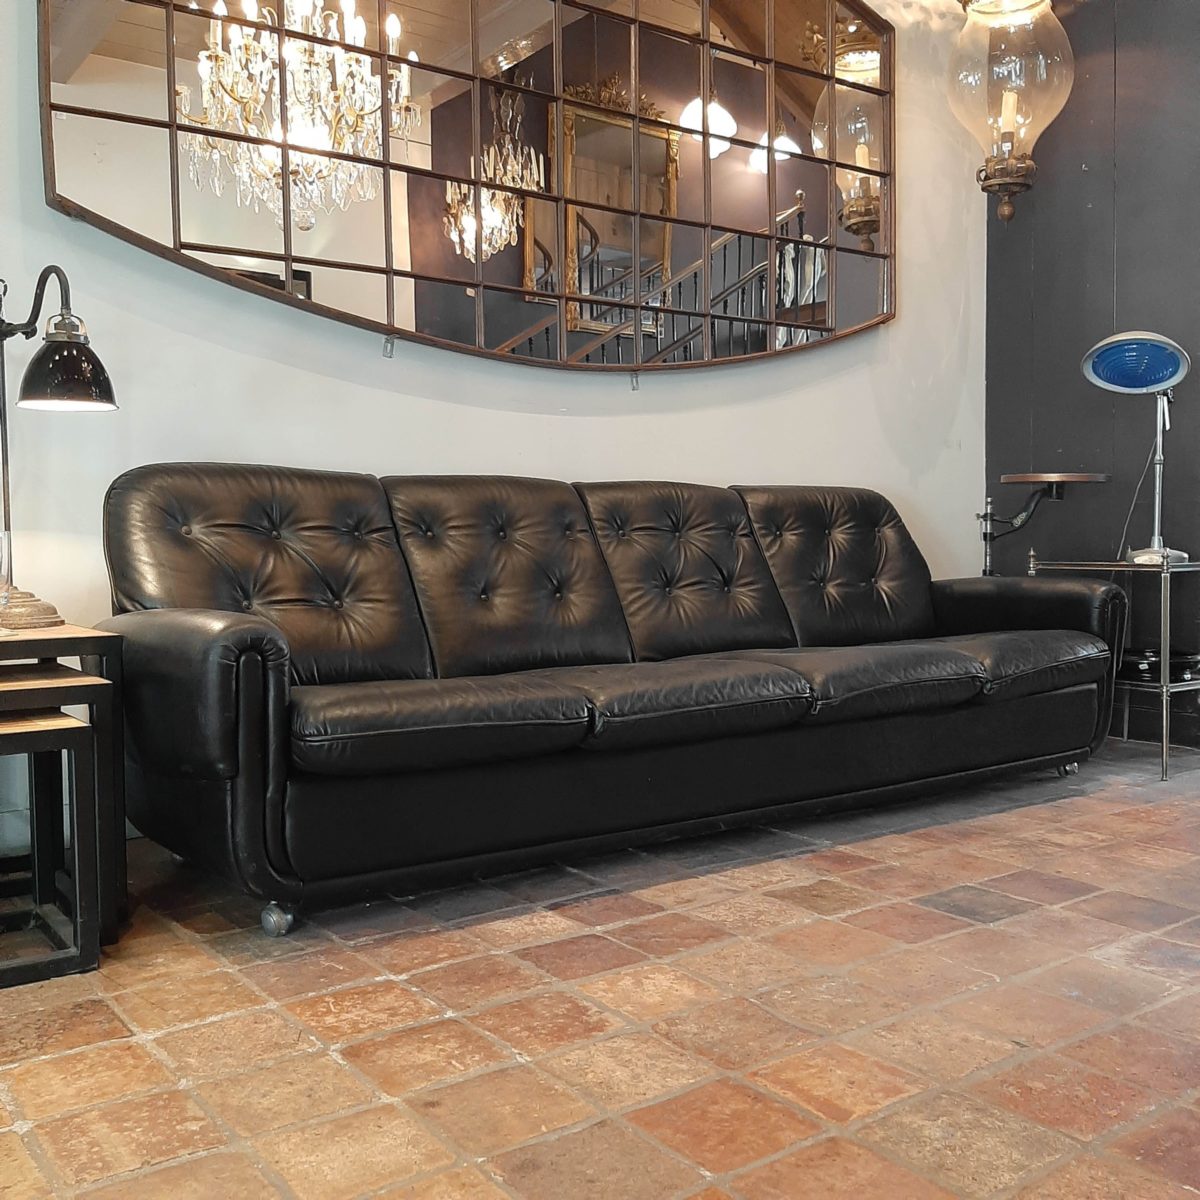 Vintage fourseater sofa made of black leather Piet Jonker